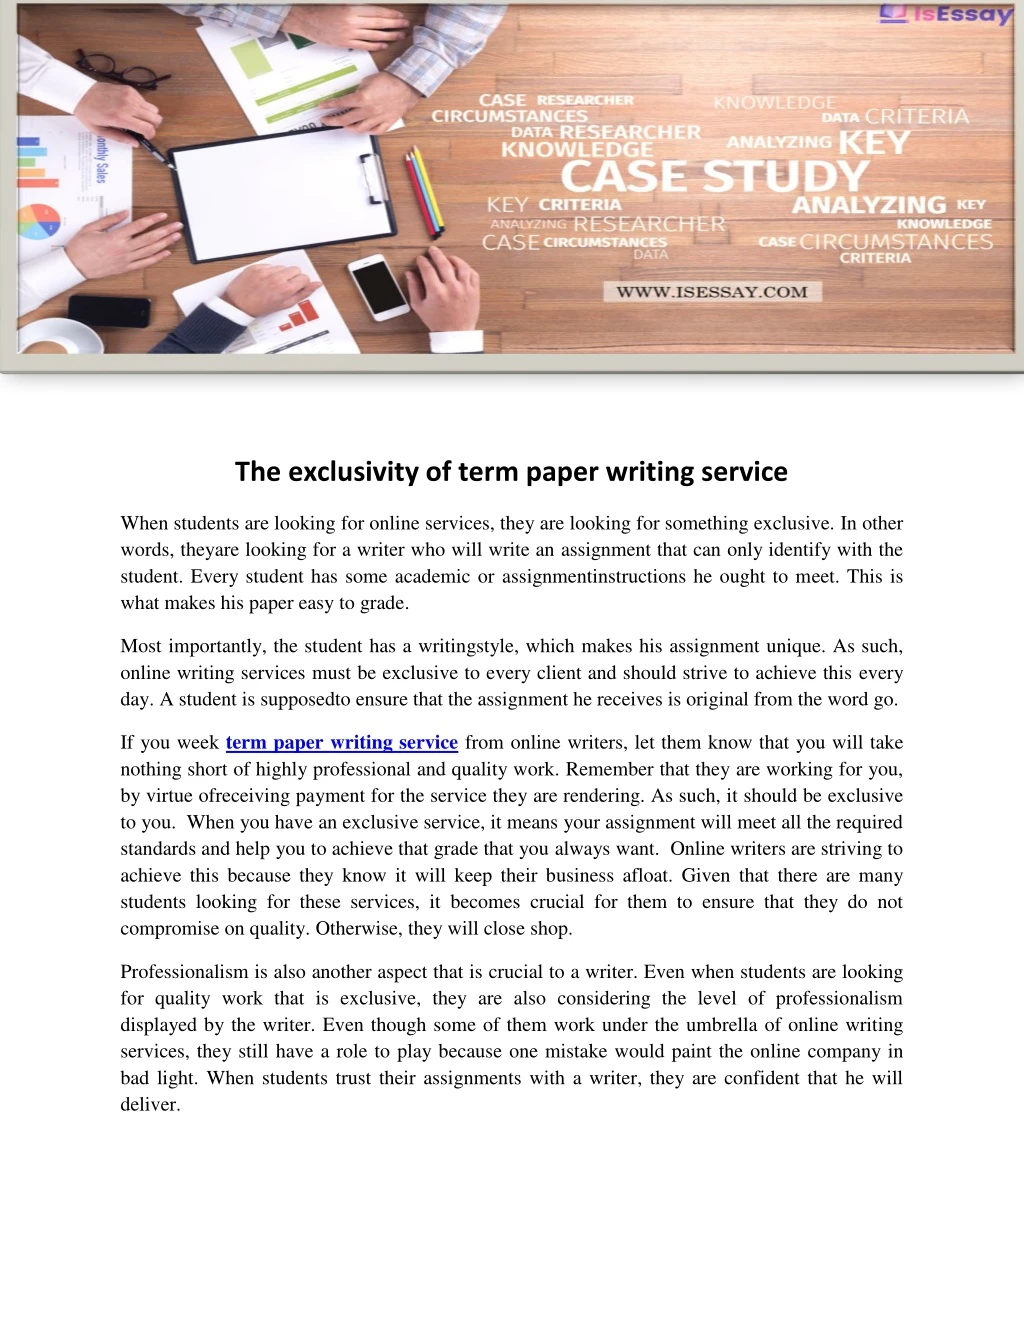 the exclusivity of term paper writing service